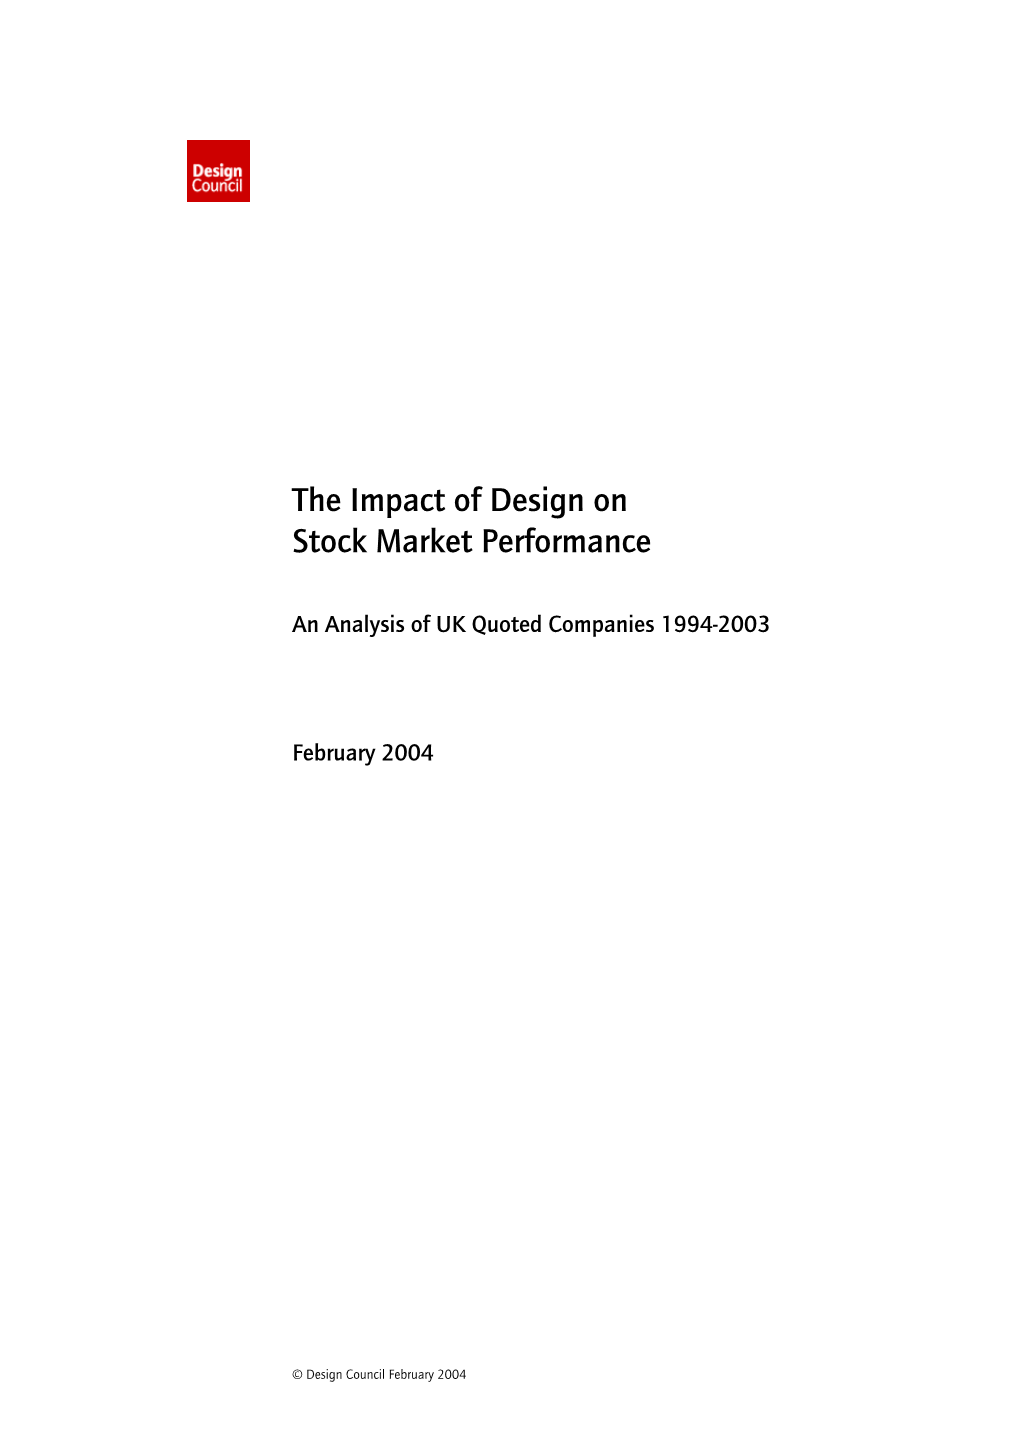 The Impact of Design on Corporate Performance